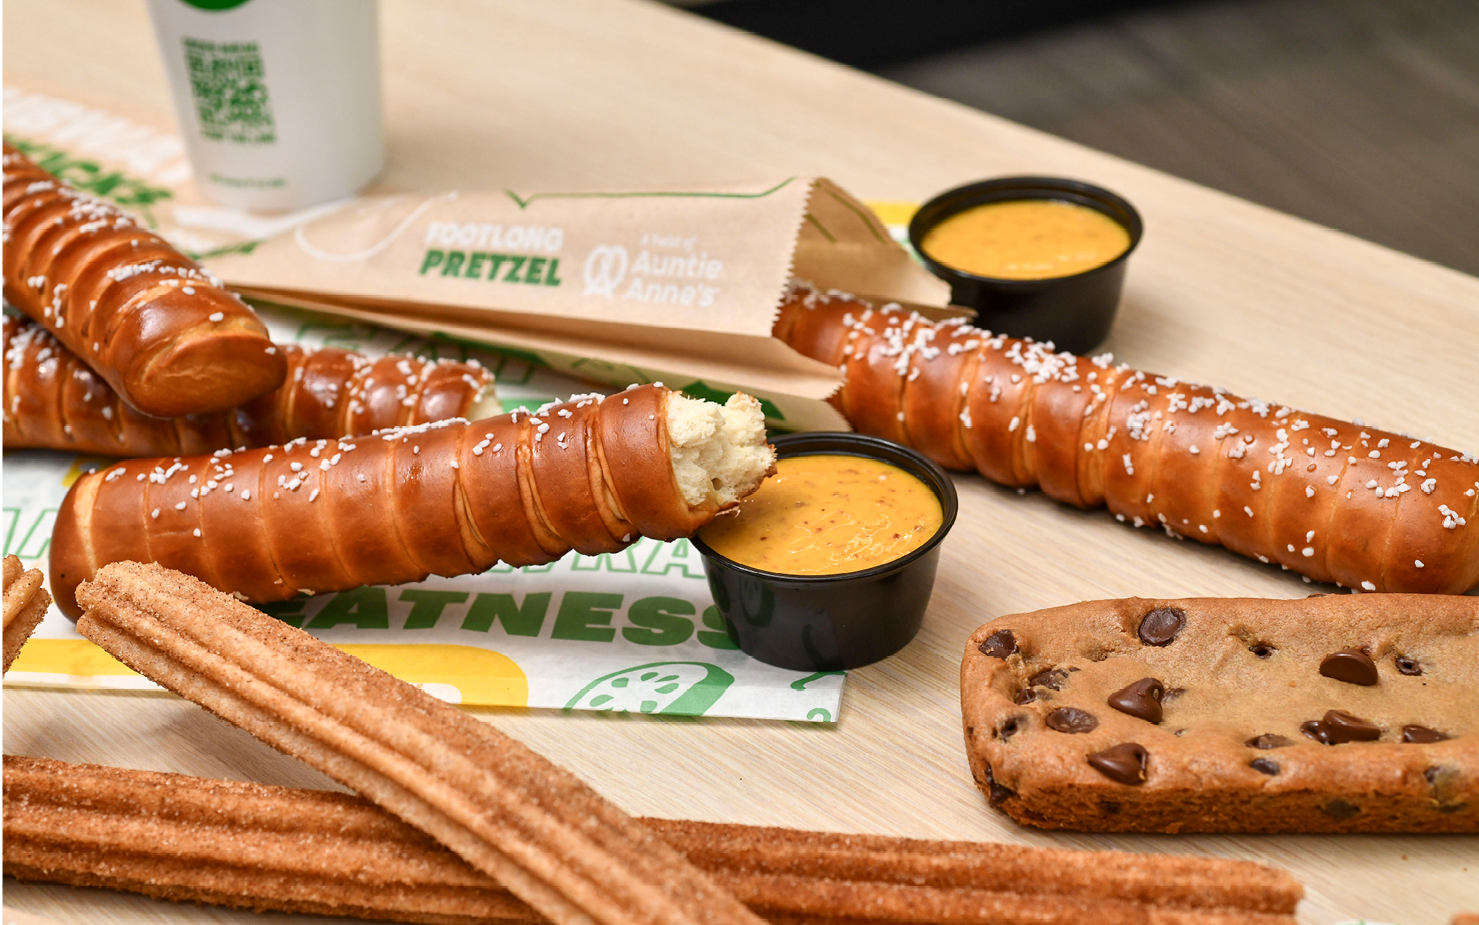 Subway fresh footlong pretzels with dips and cookies